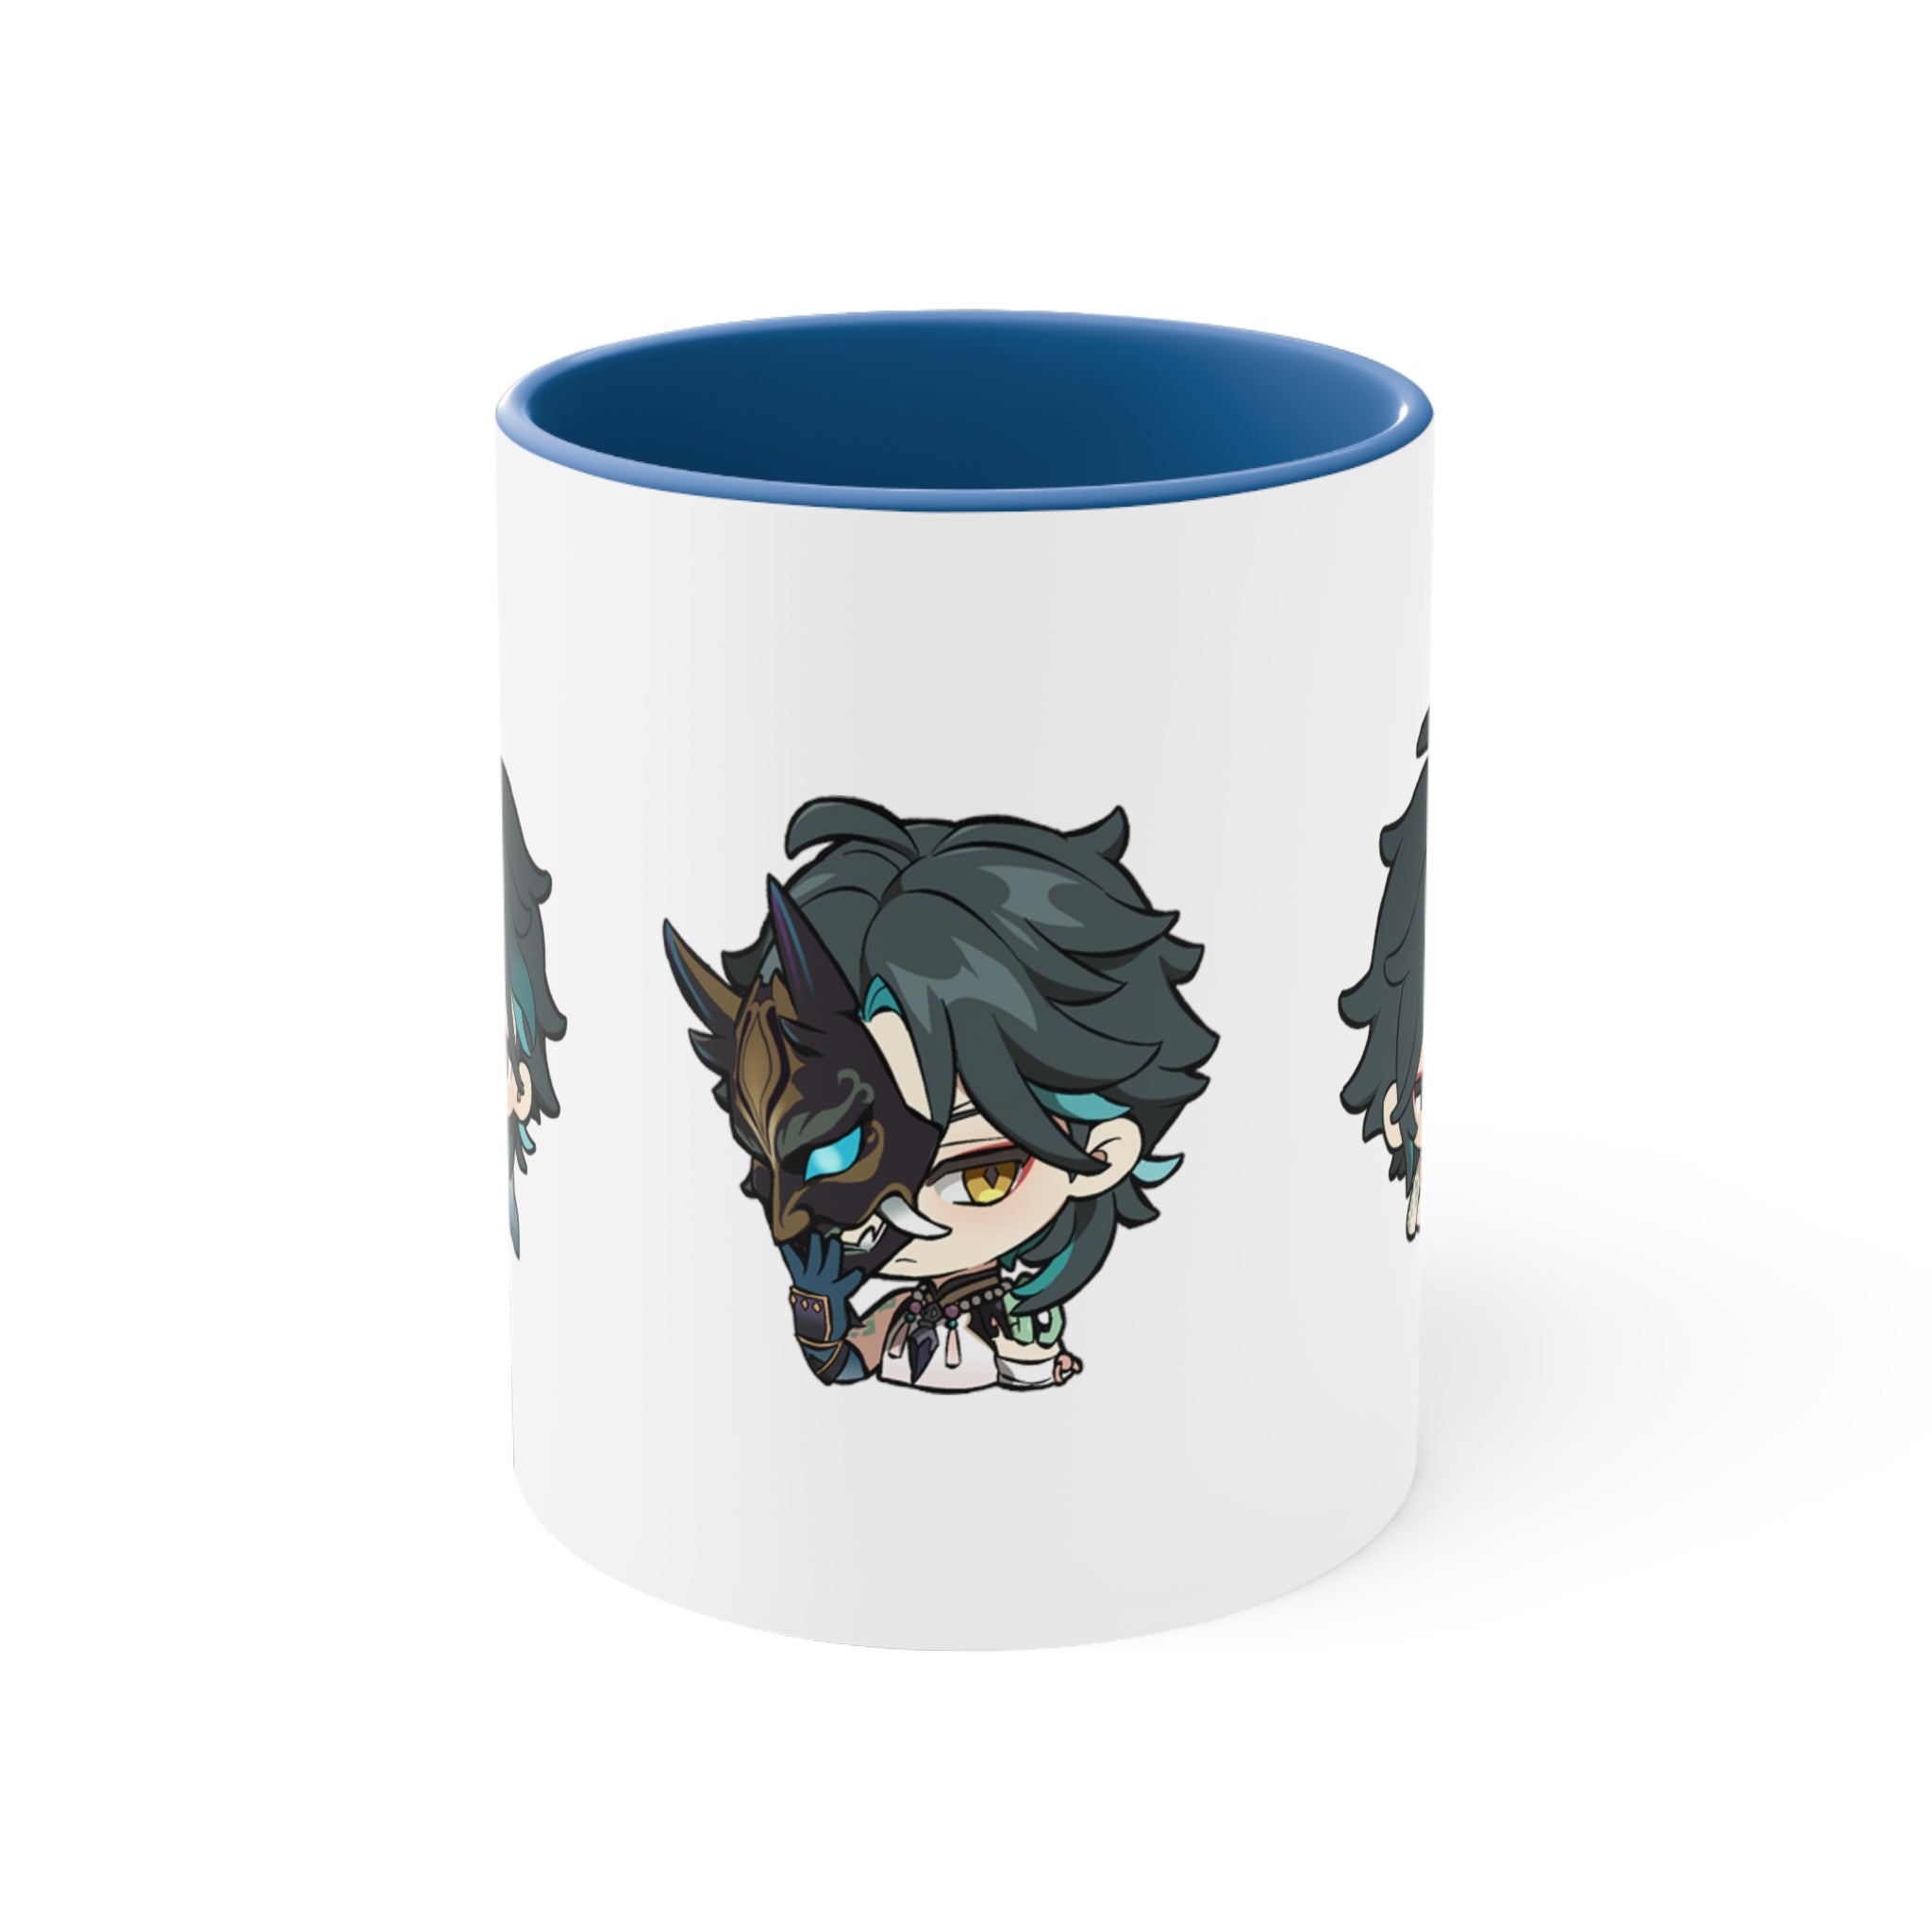 Xiao Genshin Impact Accent Coffee Mug, 11oz Cups Mugs Cup Gift For Gamer Gifts Game Anime Fanart Fan Birthday Valentine's Christmas